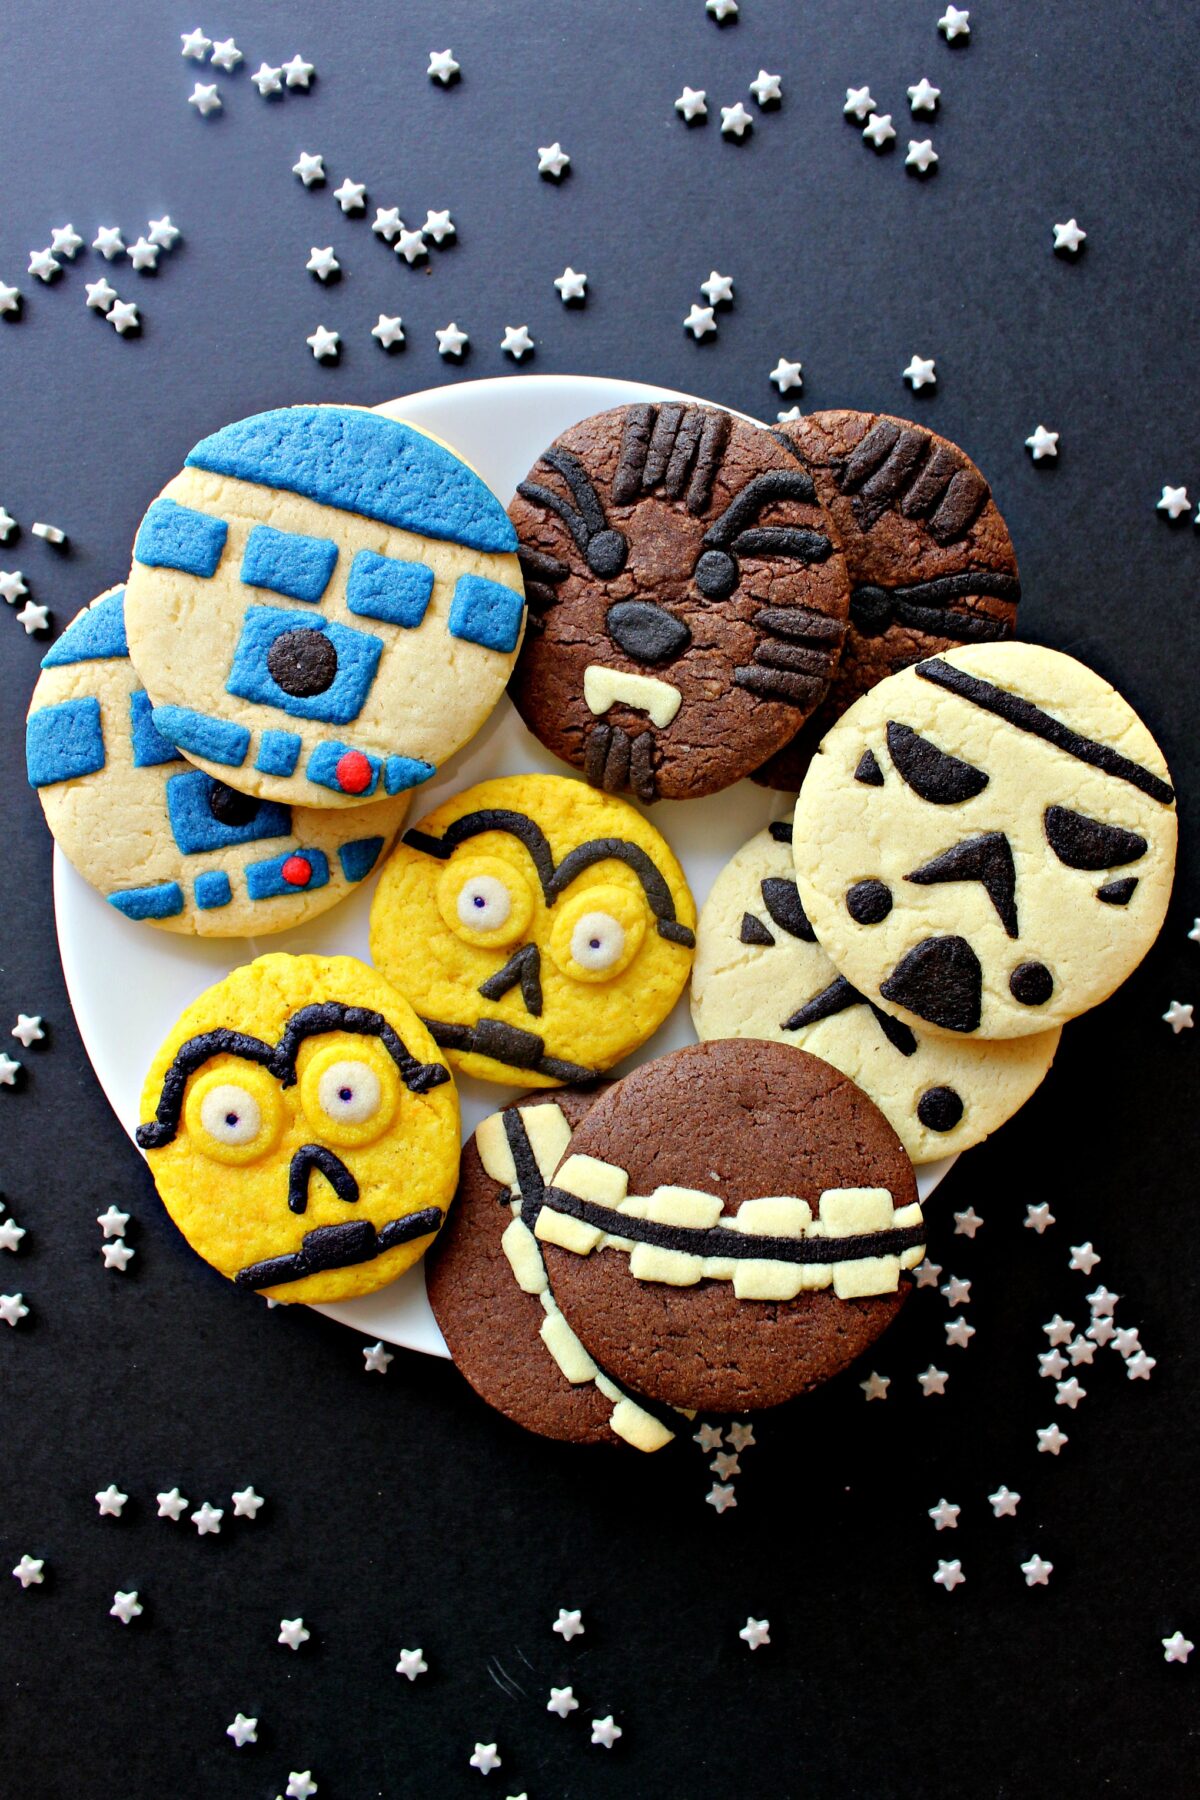 Sugar cookies decorated with colored cookie dough to look like Star Wars characters.